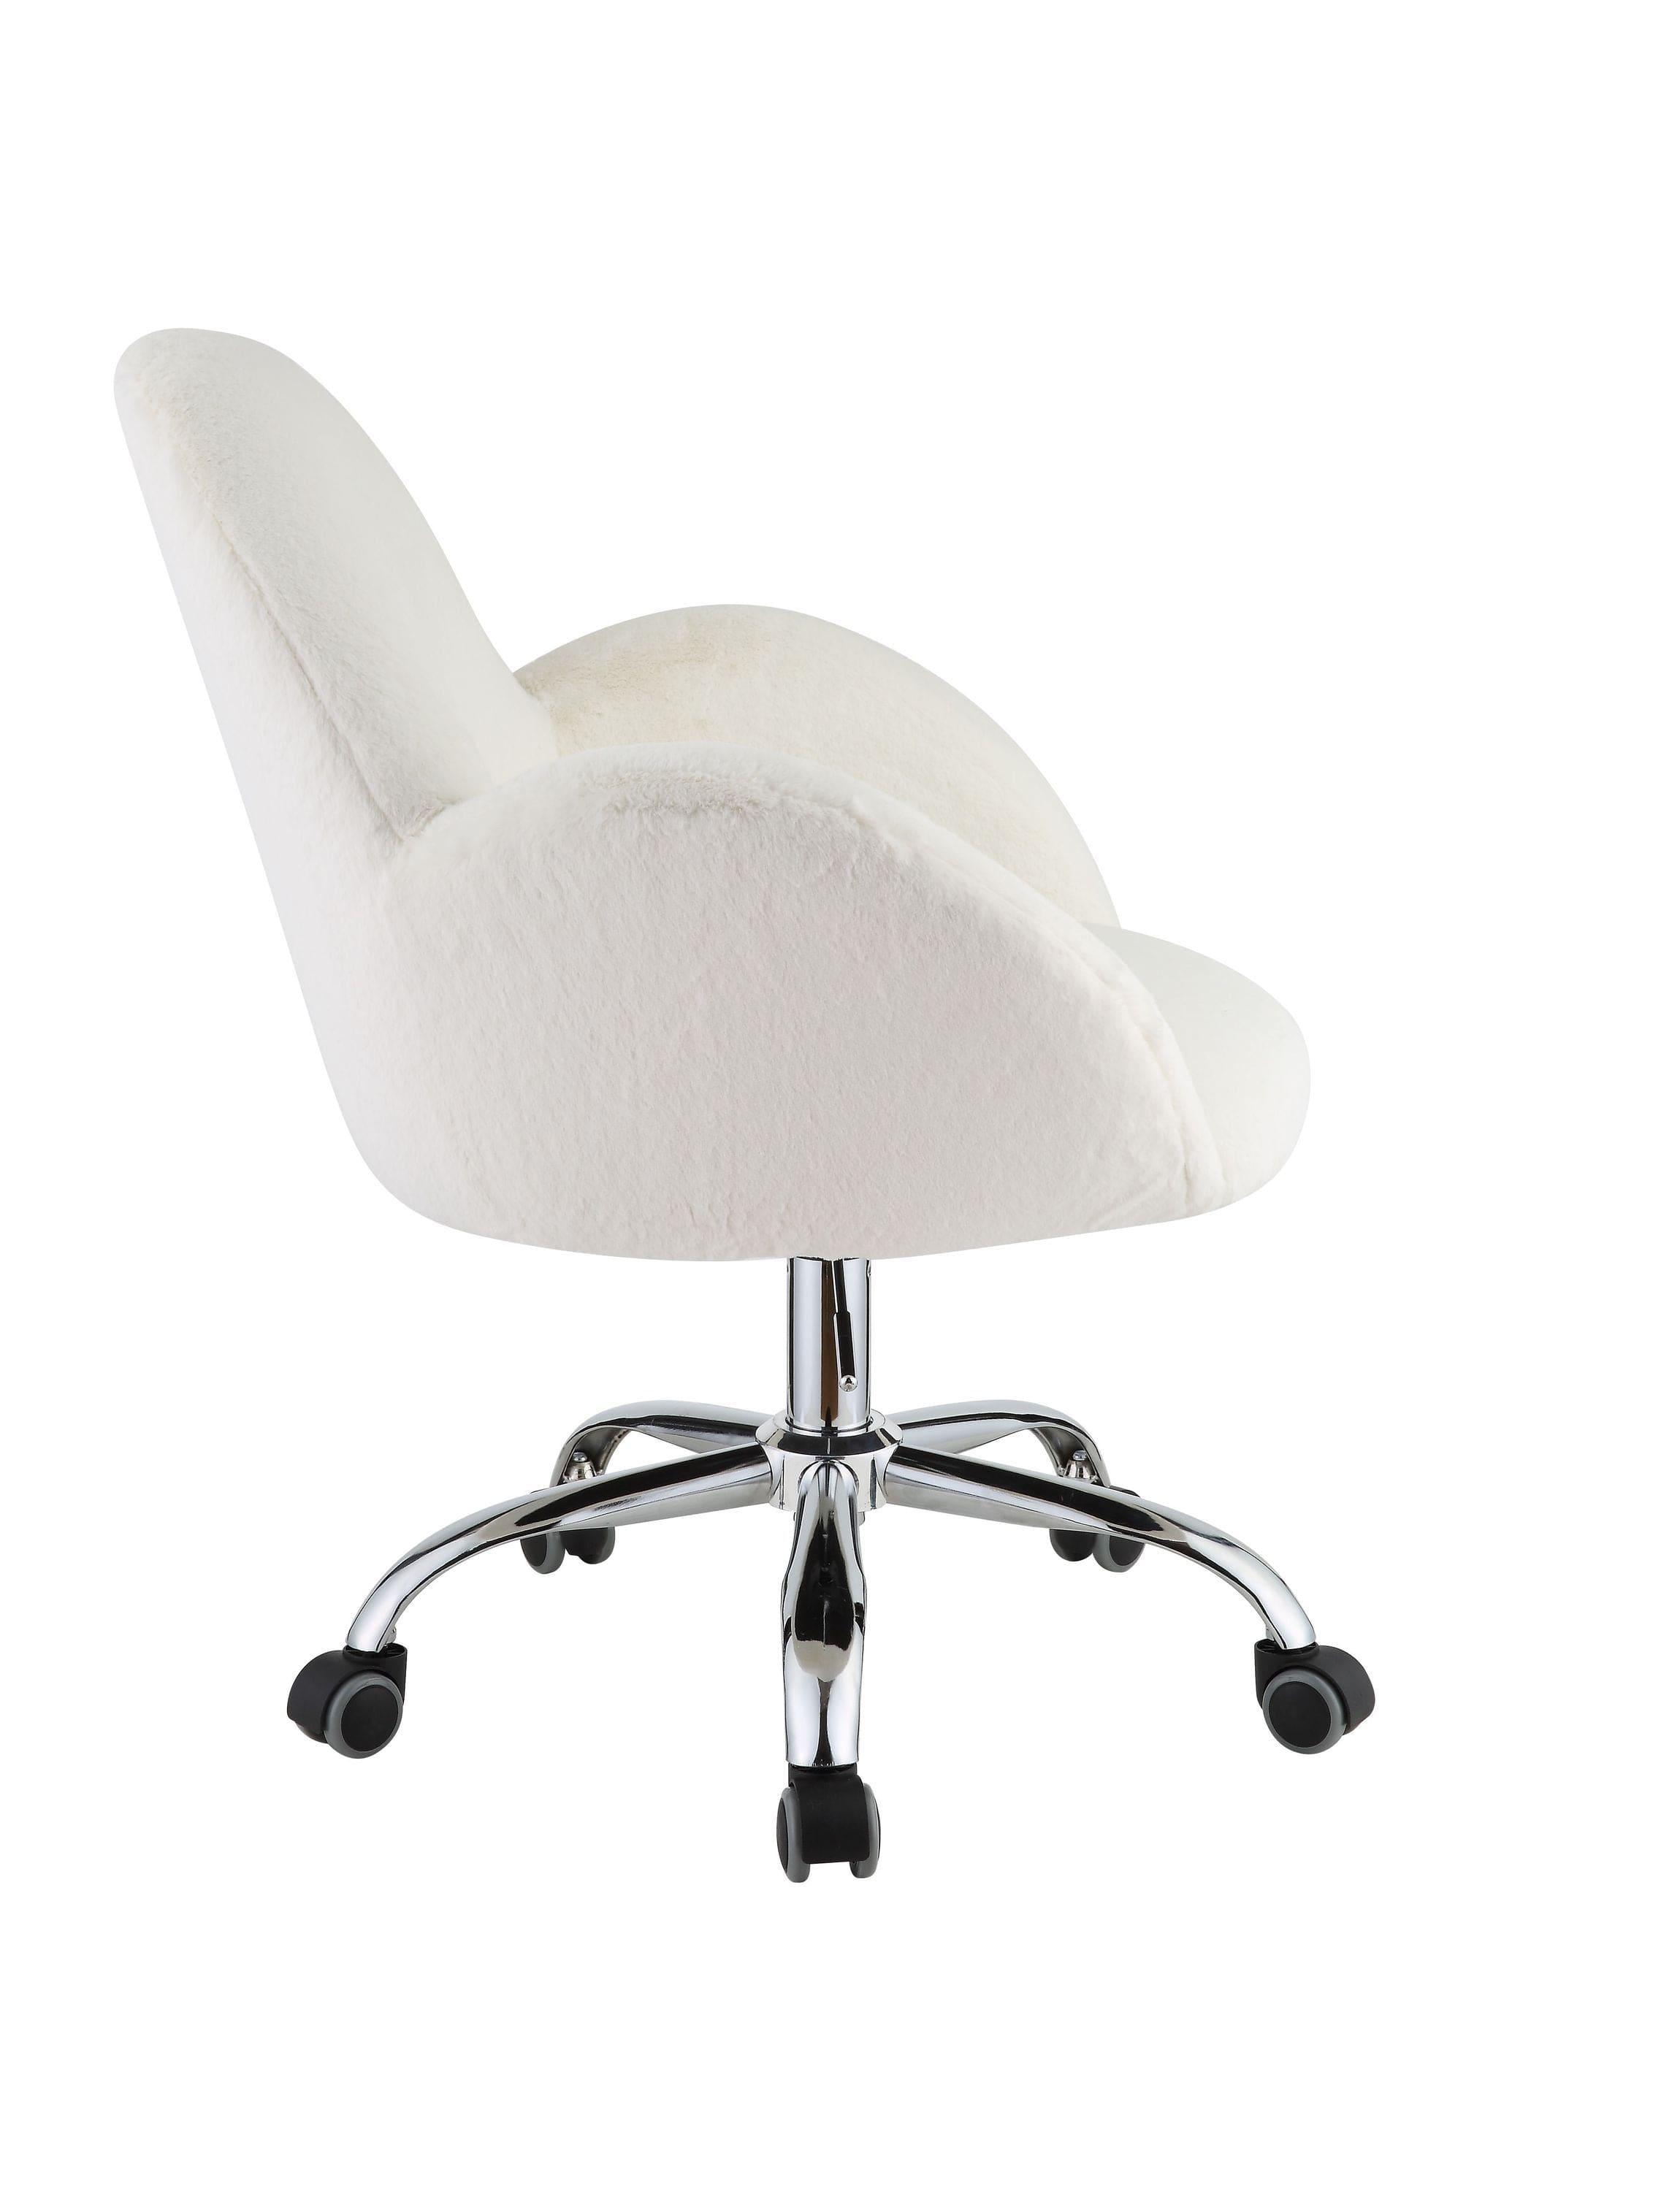 Shop ACME Jago Office Chair in White Lapin & Chrome Finish OF00119 Mademoiselle Home Decor